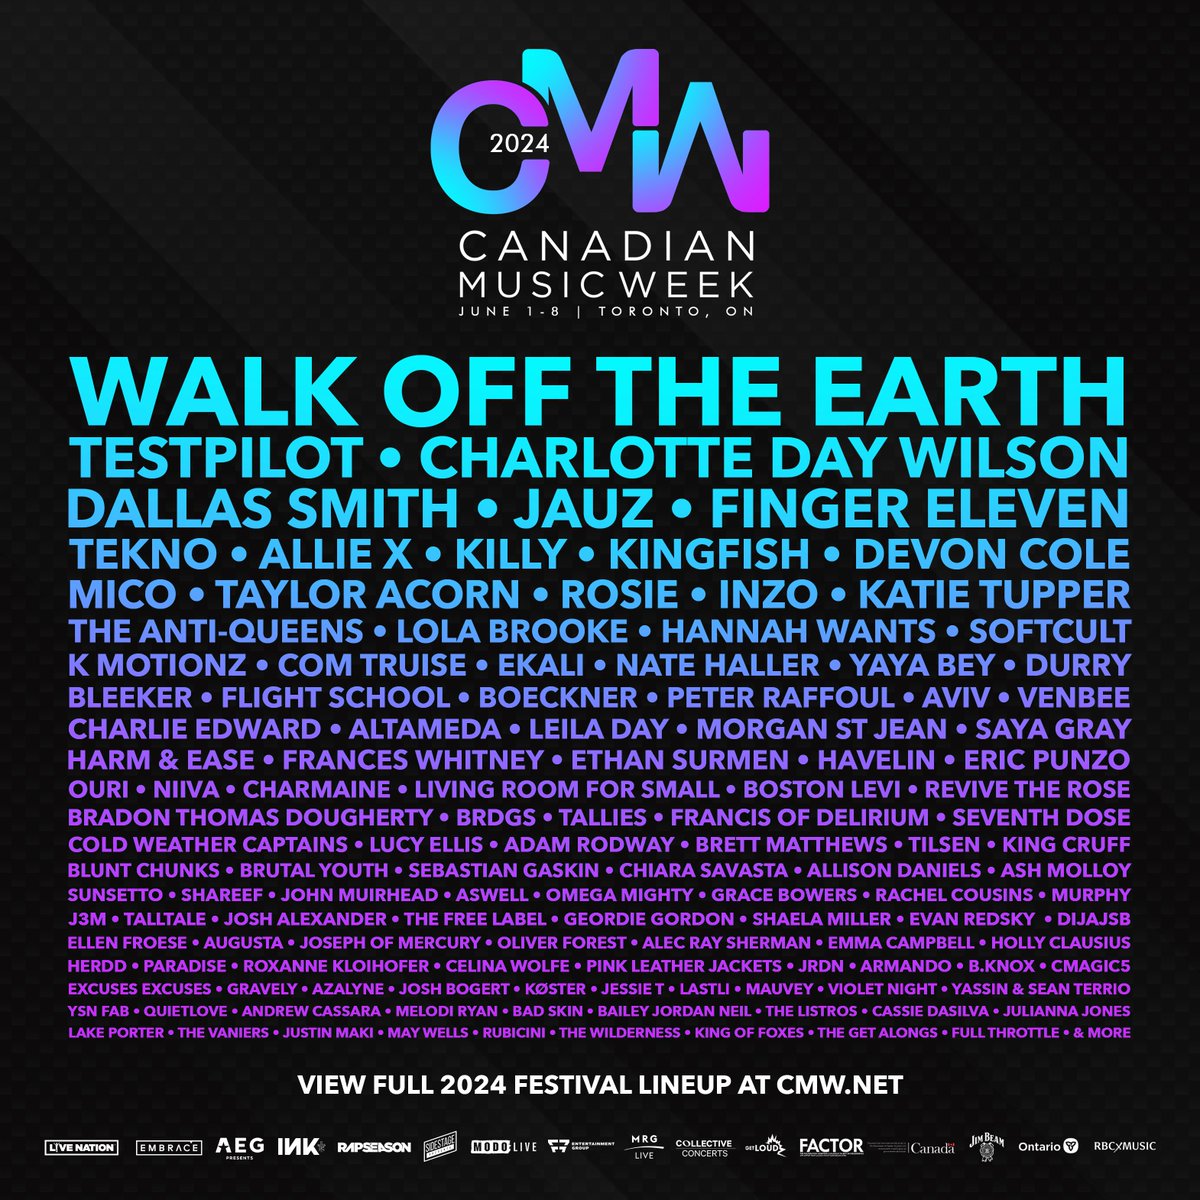 We are thrilled to announce the full 2024 CMW Festival lineup! 🎶🙌🔥 Bringing 250+ acts in over 25 venues in Toronto between June 1-8. Tap the link to get your wristbands or to purchase tickets to individual shows. cmw.net/festival/sched… #cmw2024 #canadianmusicweek